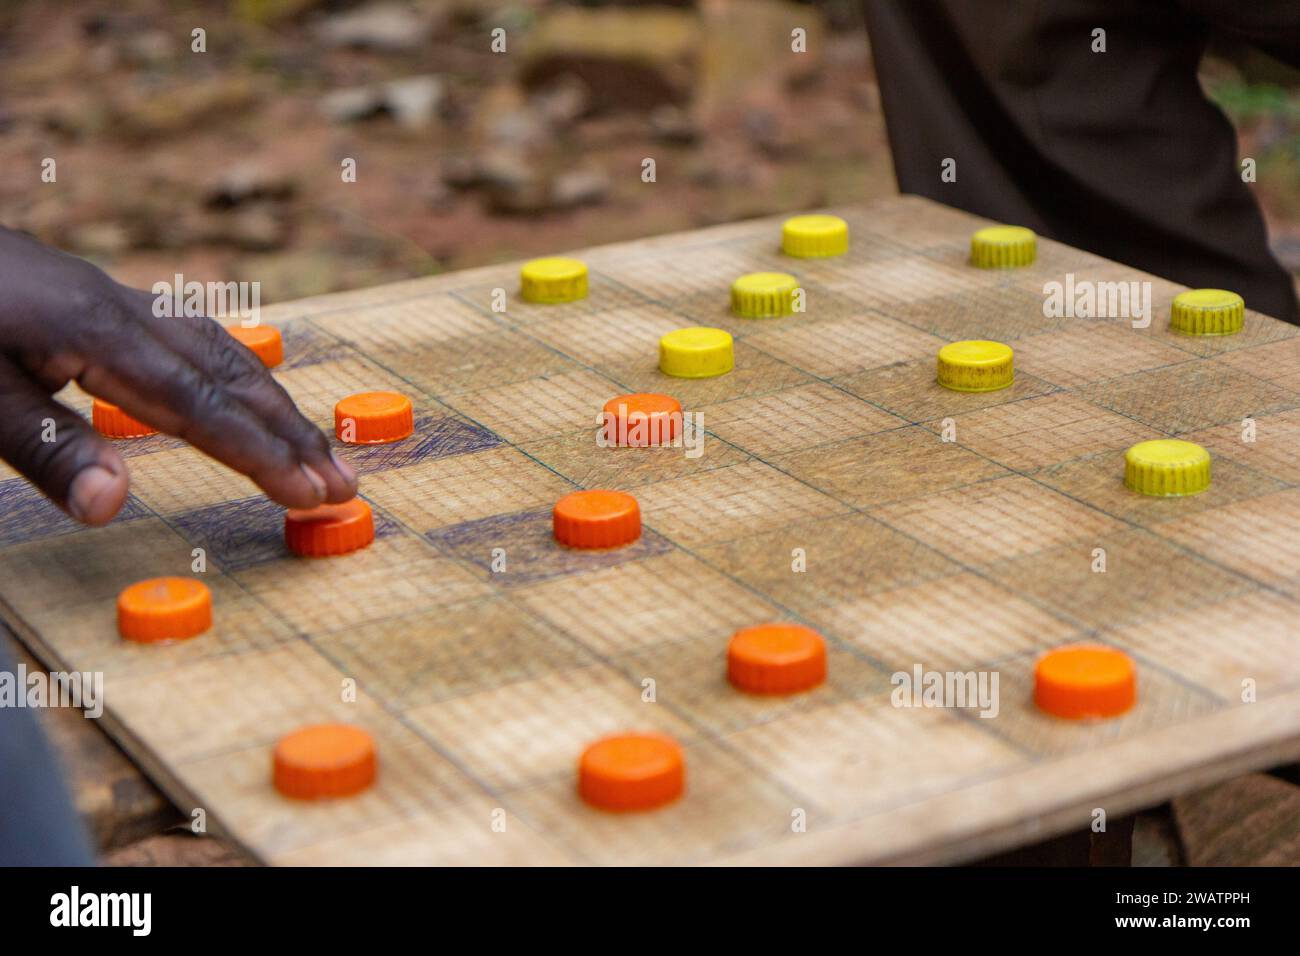 Ugandan men playing draughts (checkers) with plastic bottle lids serving as pieces. Stock Photo